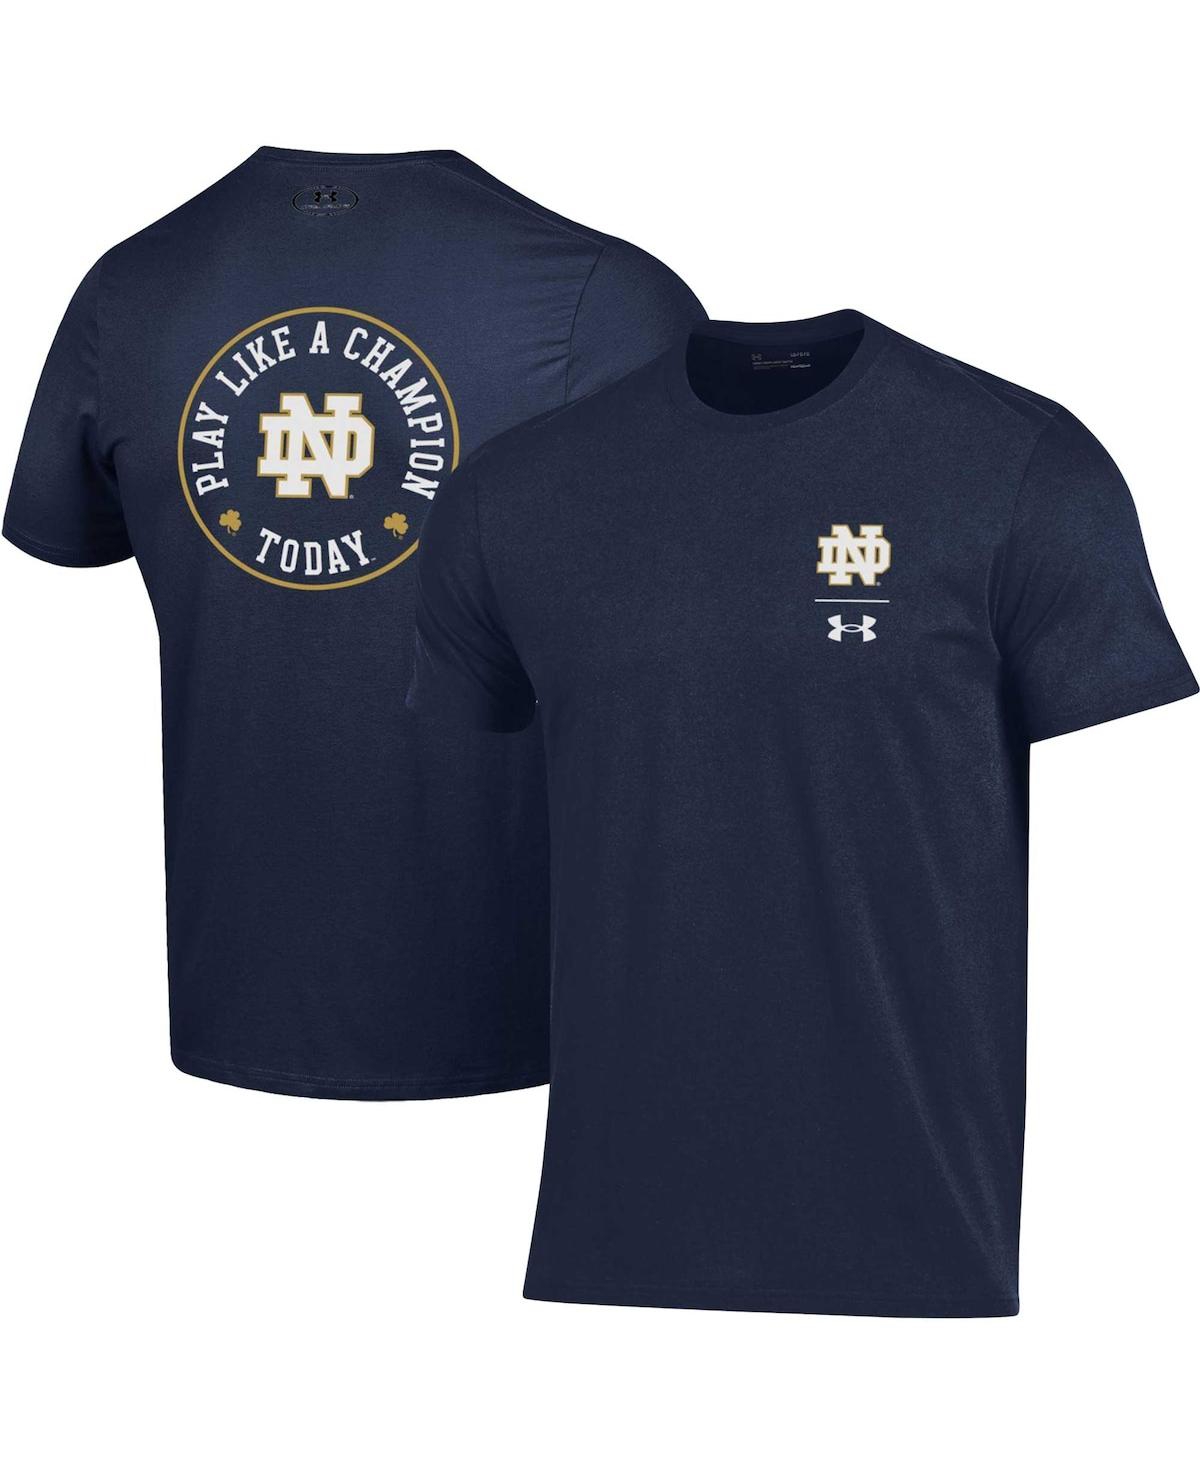 Under Armour Men's  Navy Notre Dame Fighting Irish Play Like A Champion Today T-shirt